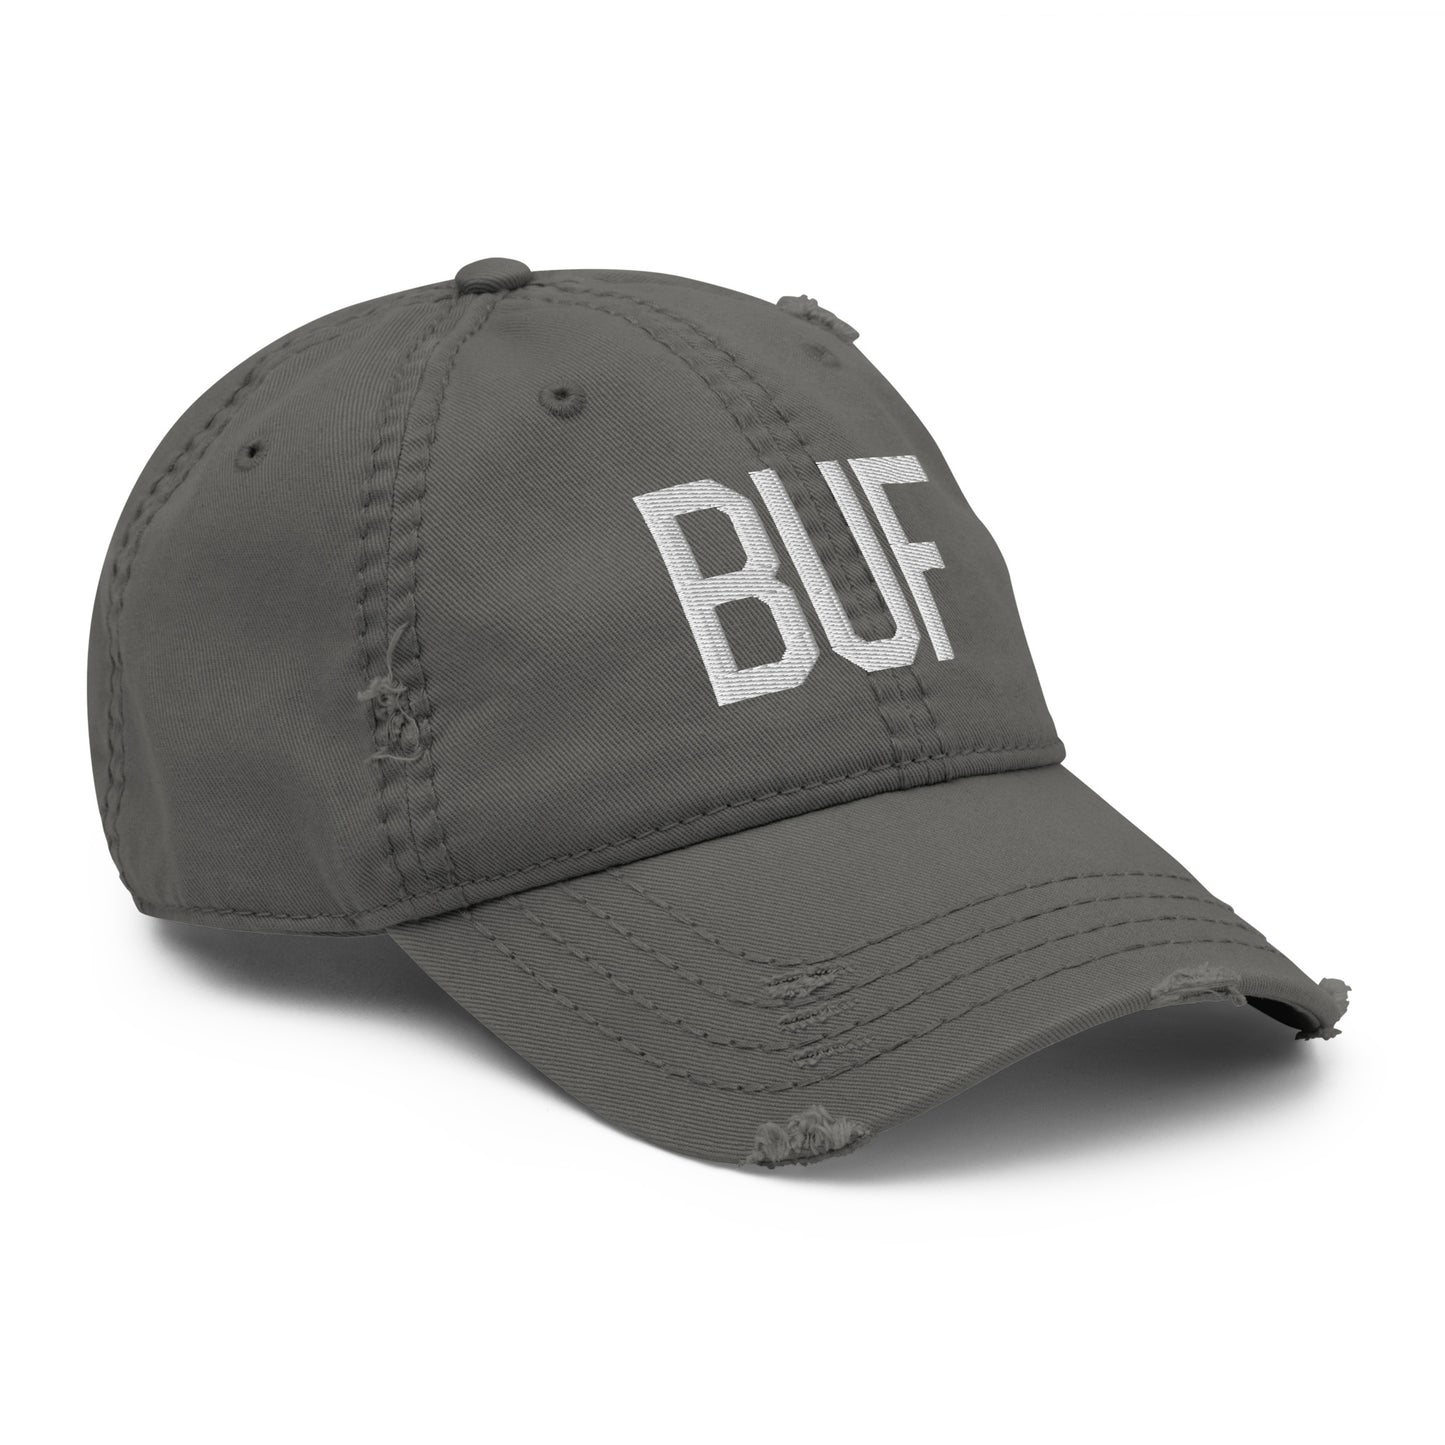 Airport Code Distressed Hat - White • BUF Buffalo • YHM Designs - Image 17